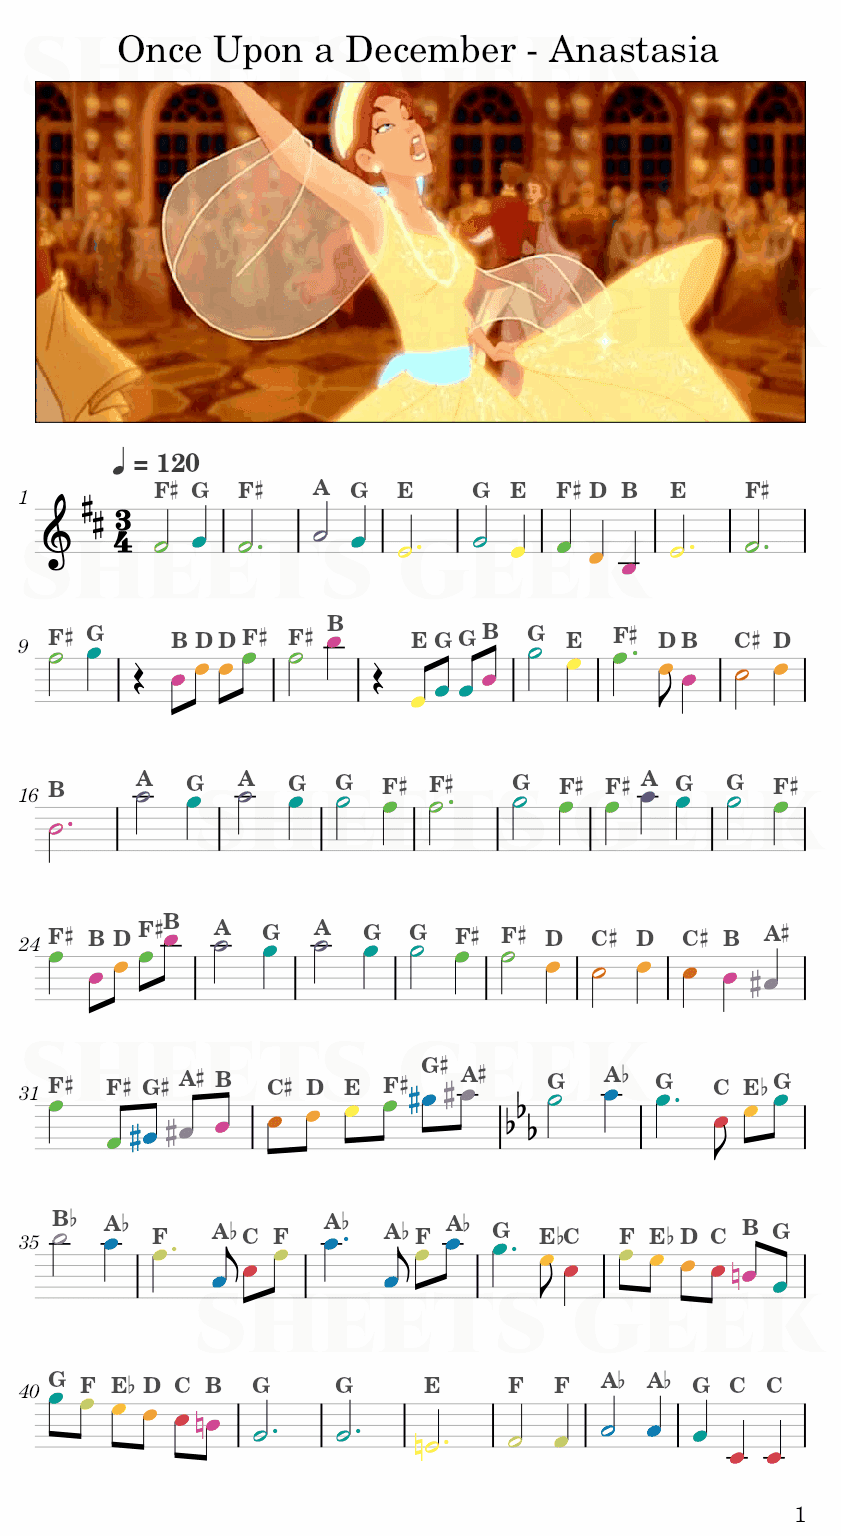 Once Upon a December - Anastasia Easy Sheet Music Free for piano, keyboard, flute, violin, sax, cello page 1